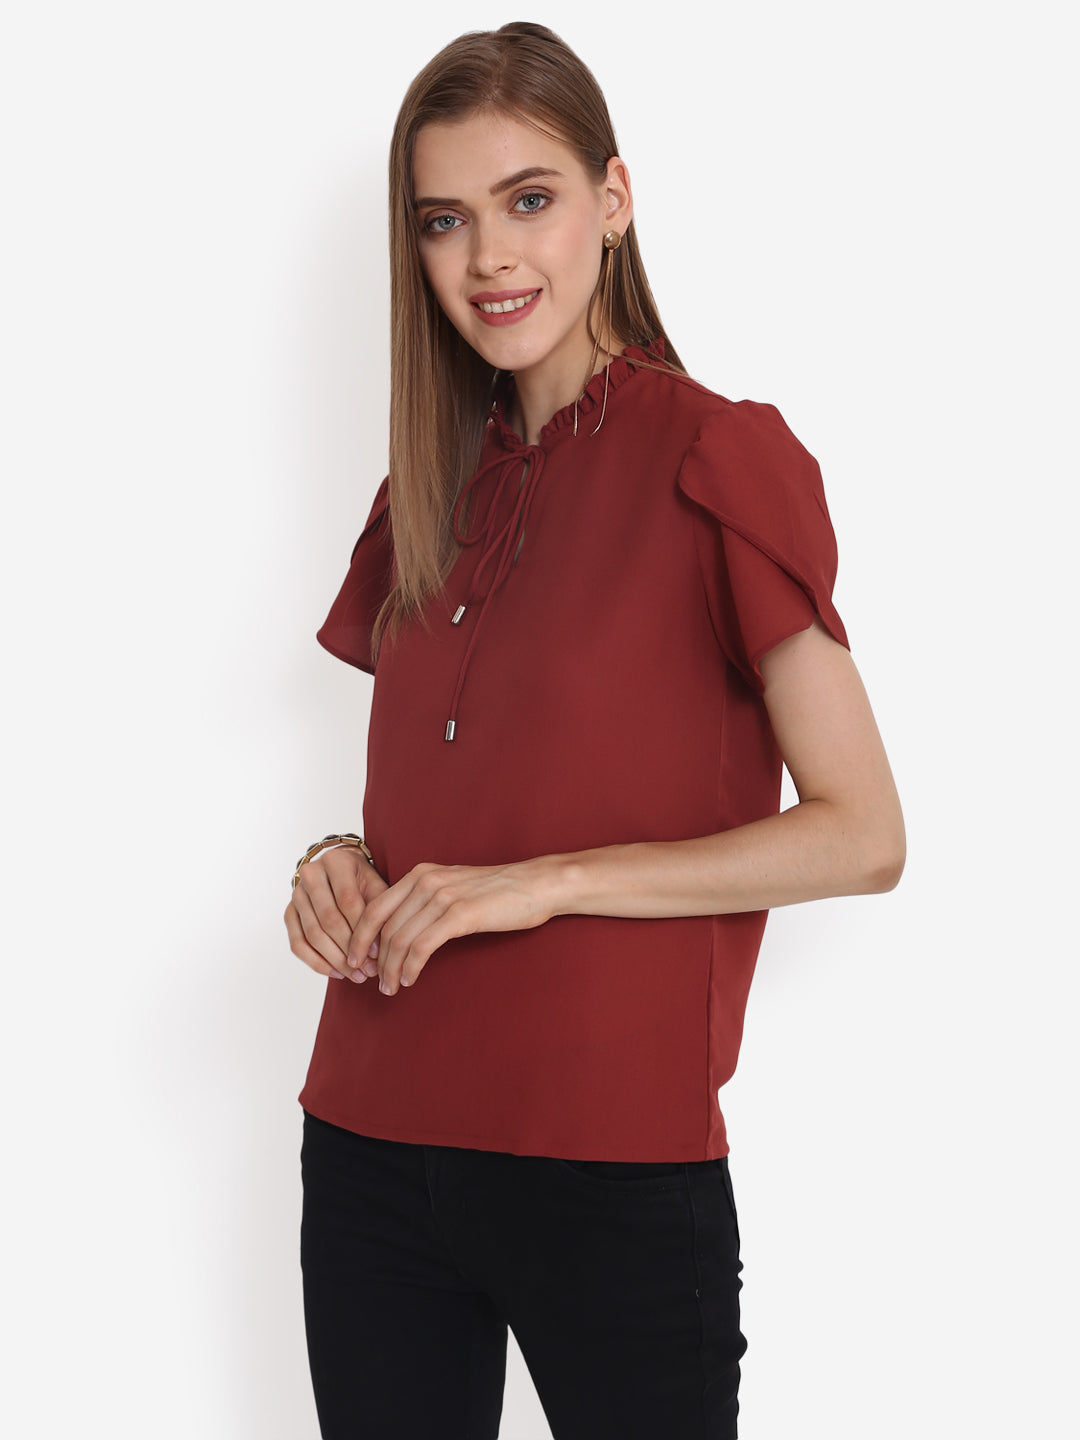 Gathered Neck Top with Short Petal Sleeves - Purys